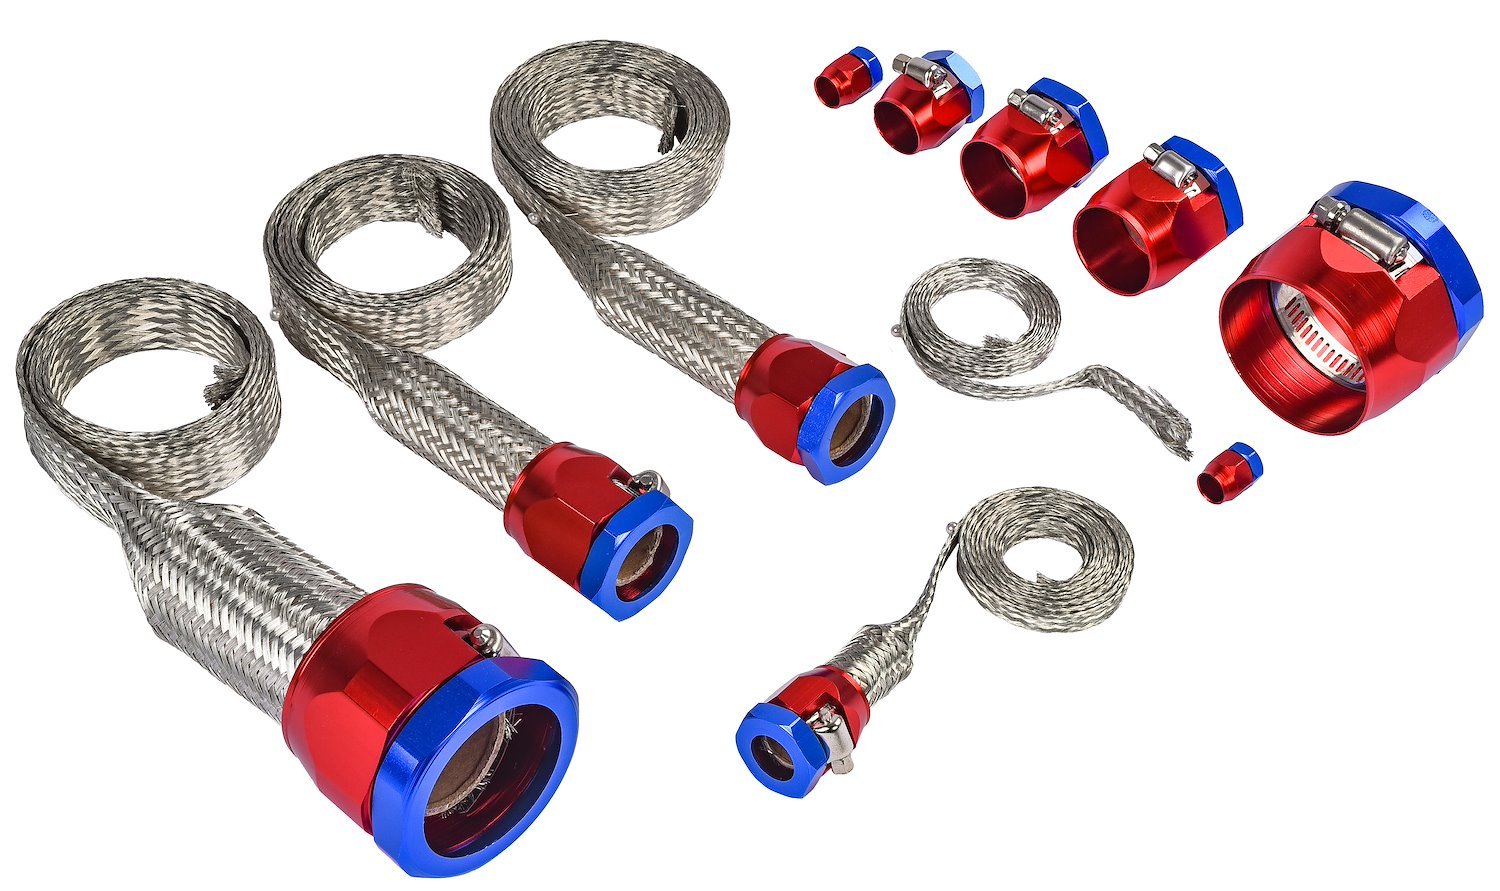 Braided Hose Sleeving Kit with Clamps [Red and